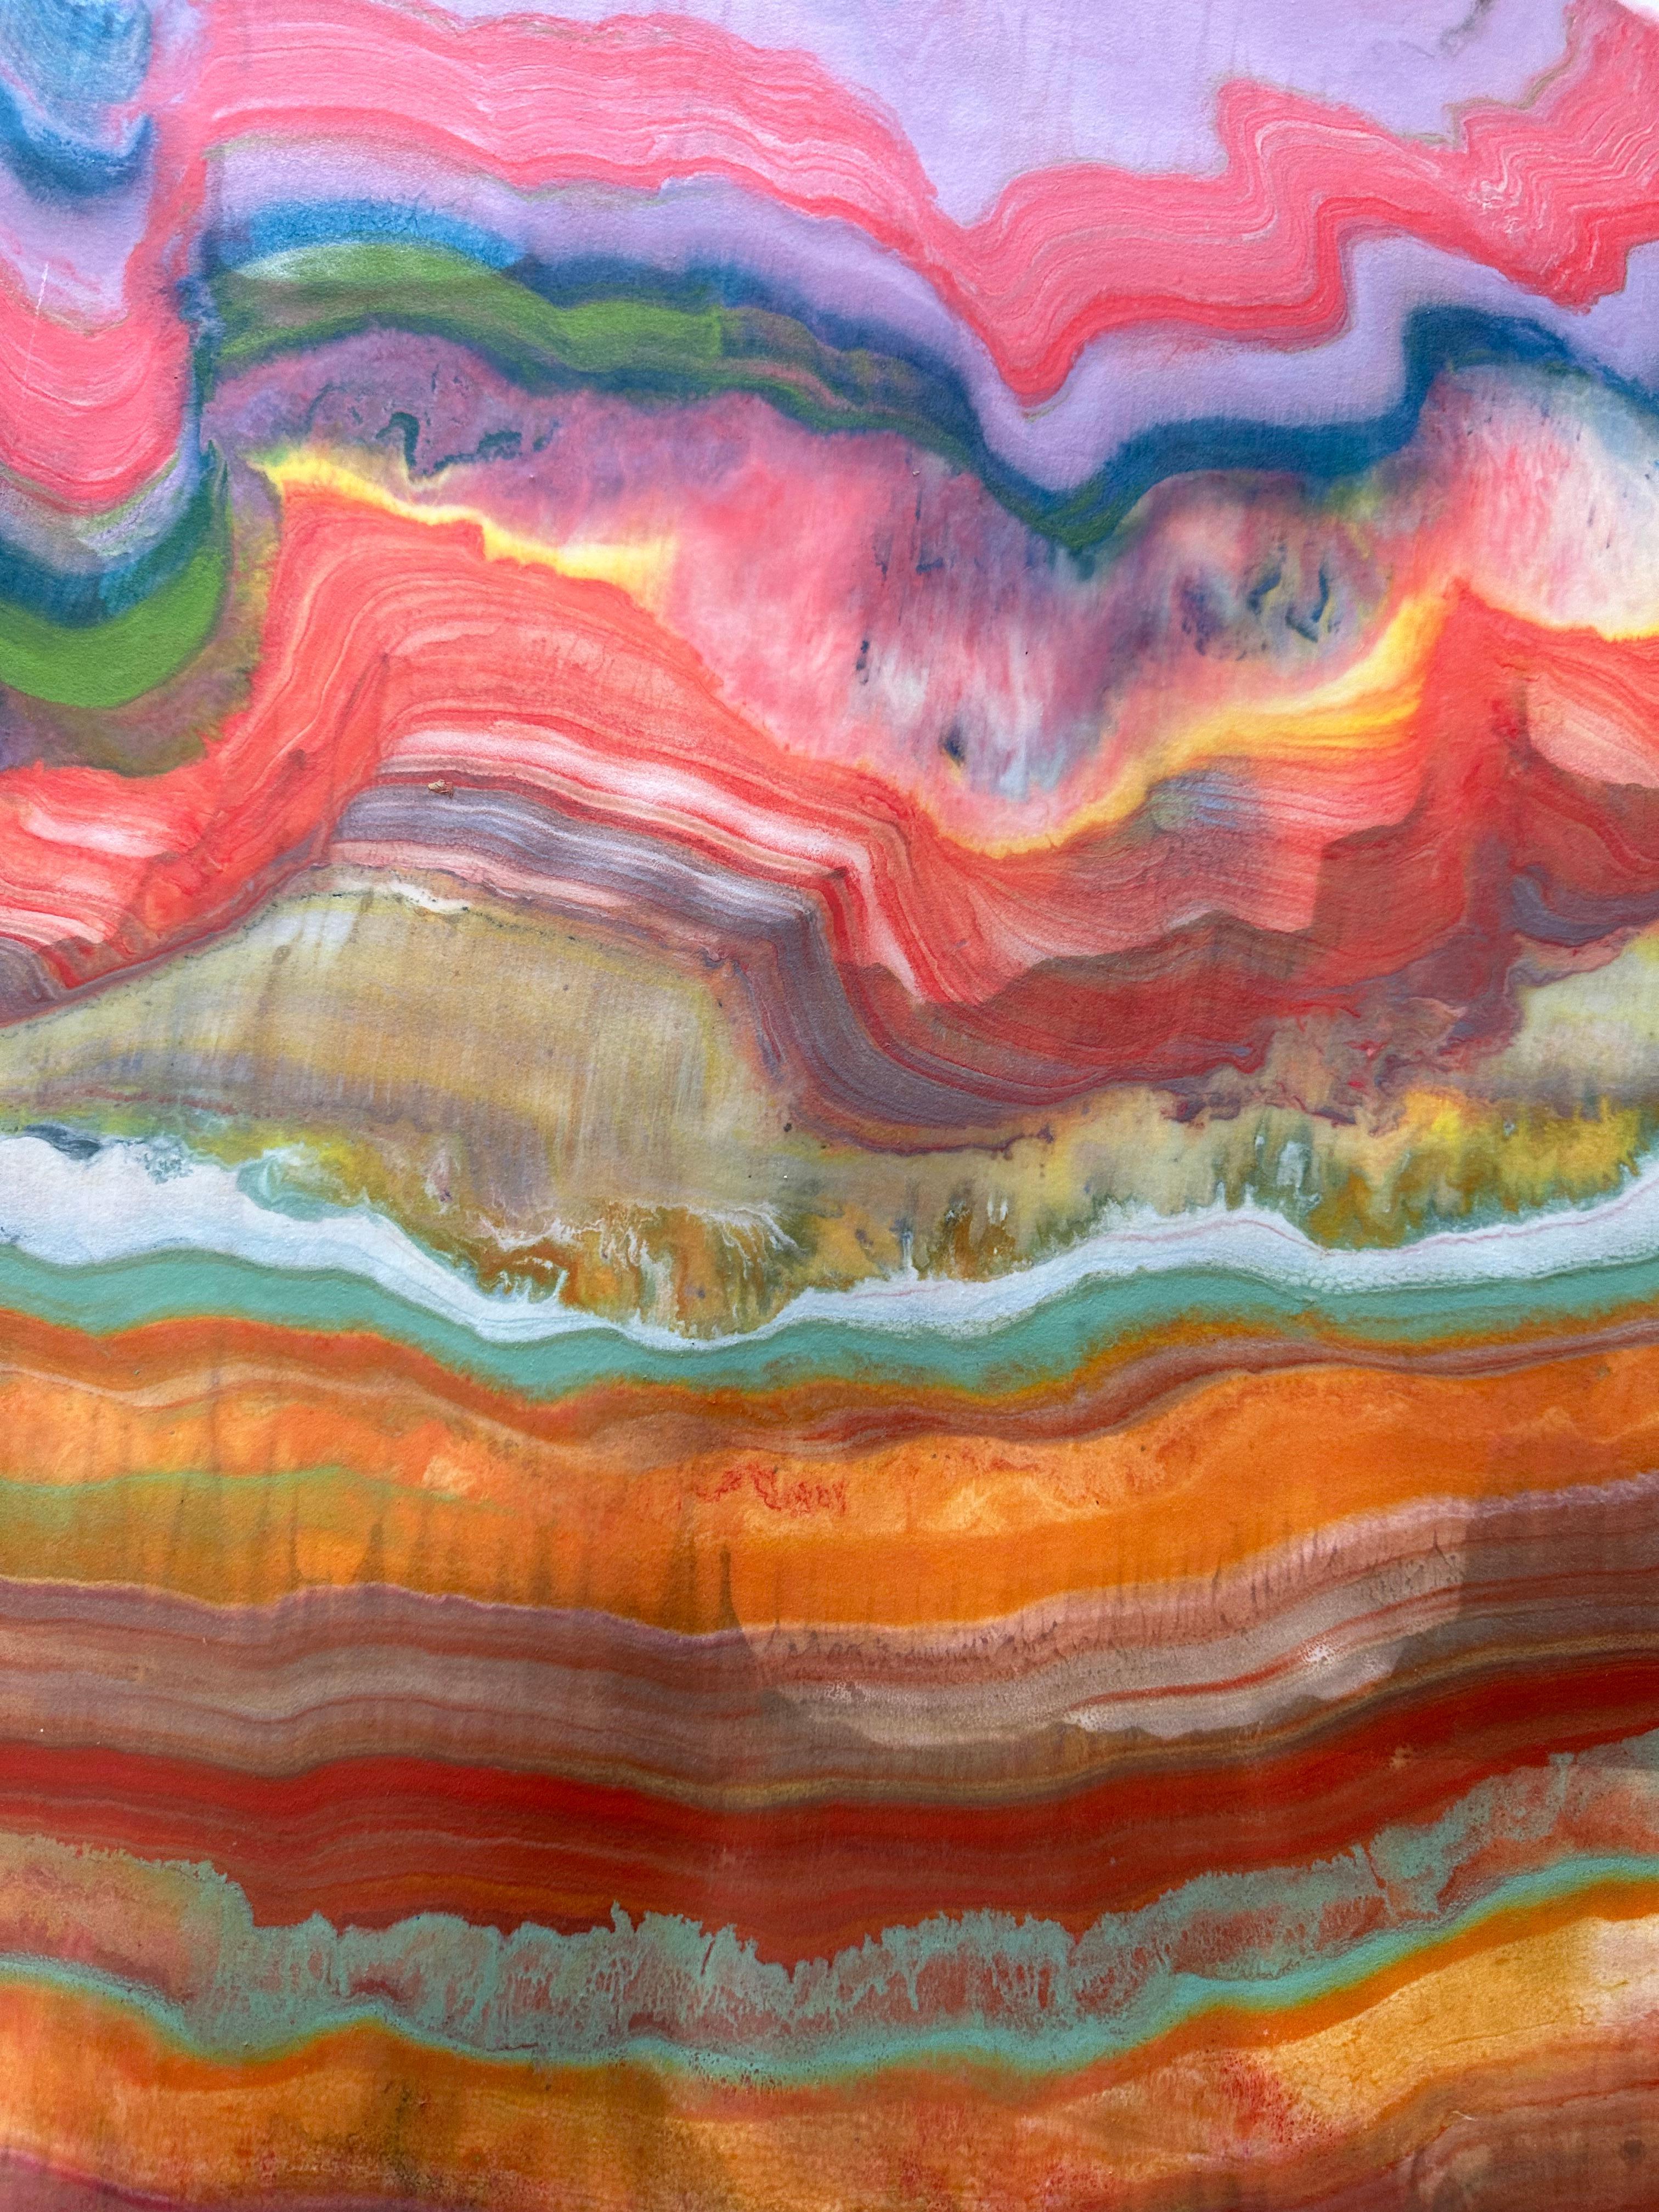 Laura Moriarty's Talking to Rocks 31 is a multicolored encaustic monotype on kozo paper. Layers of pigmented beeswax on lightweight paper create an undulating composition suggesting layers of the earth's crust and geological formations depicted in